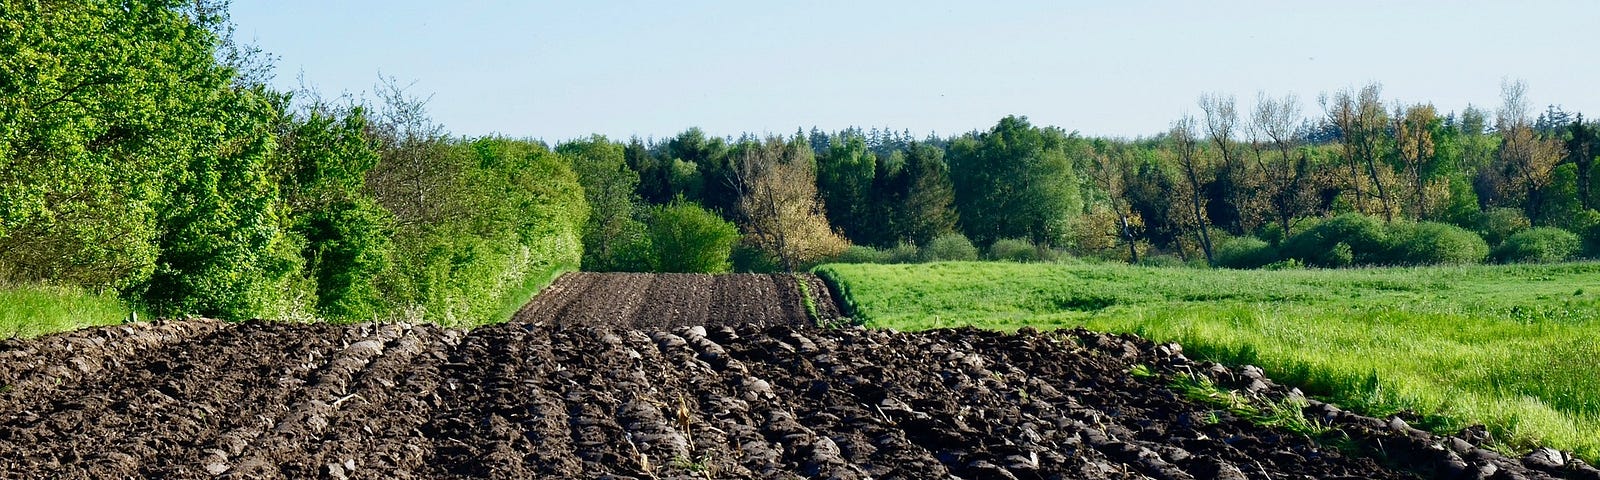 Plowed furrows of dark soil contrasted against green grass and trees.